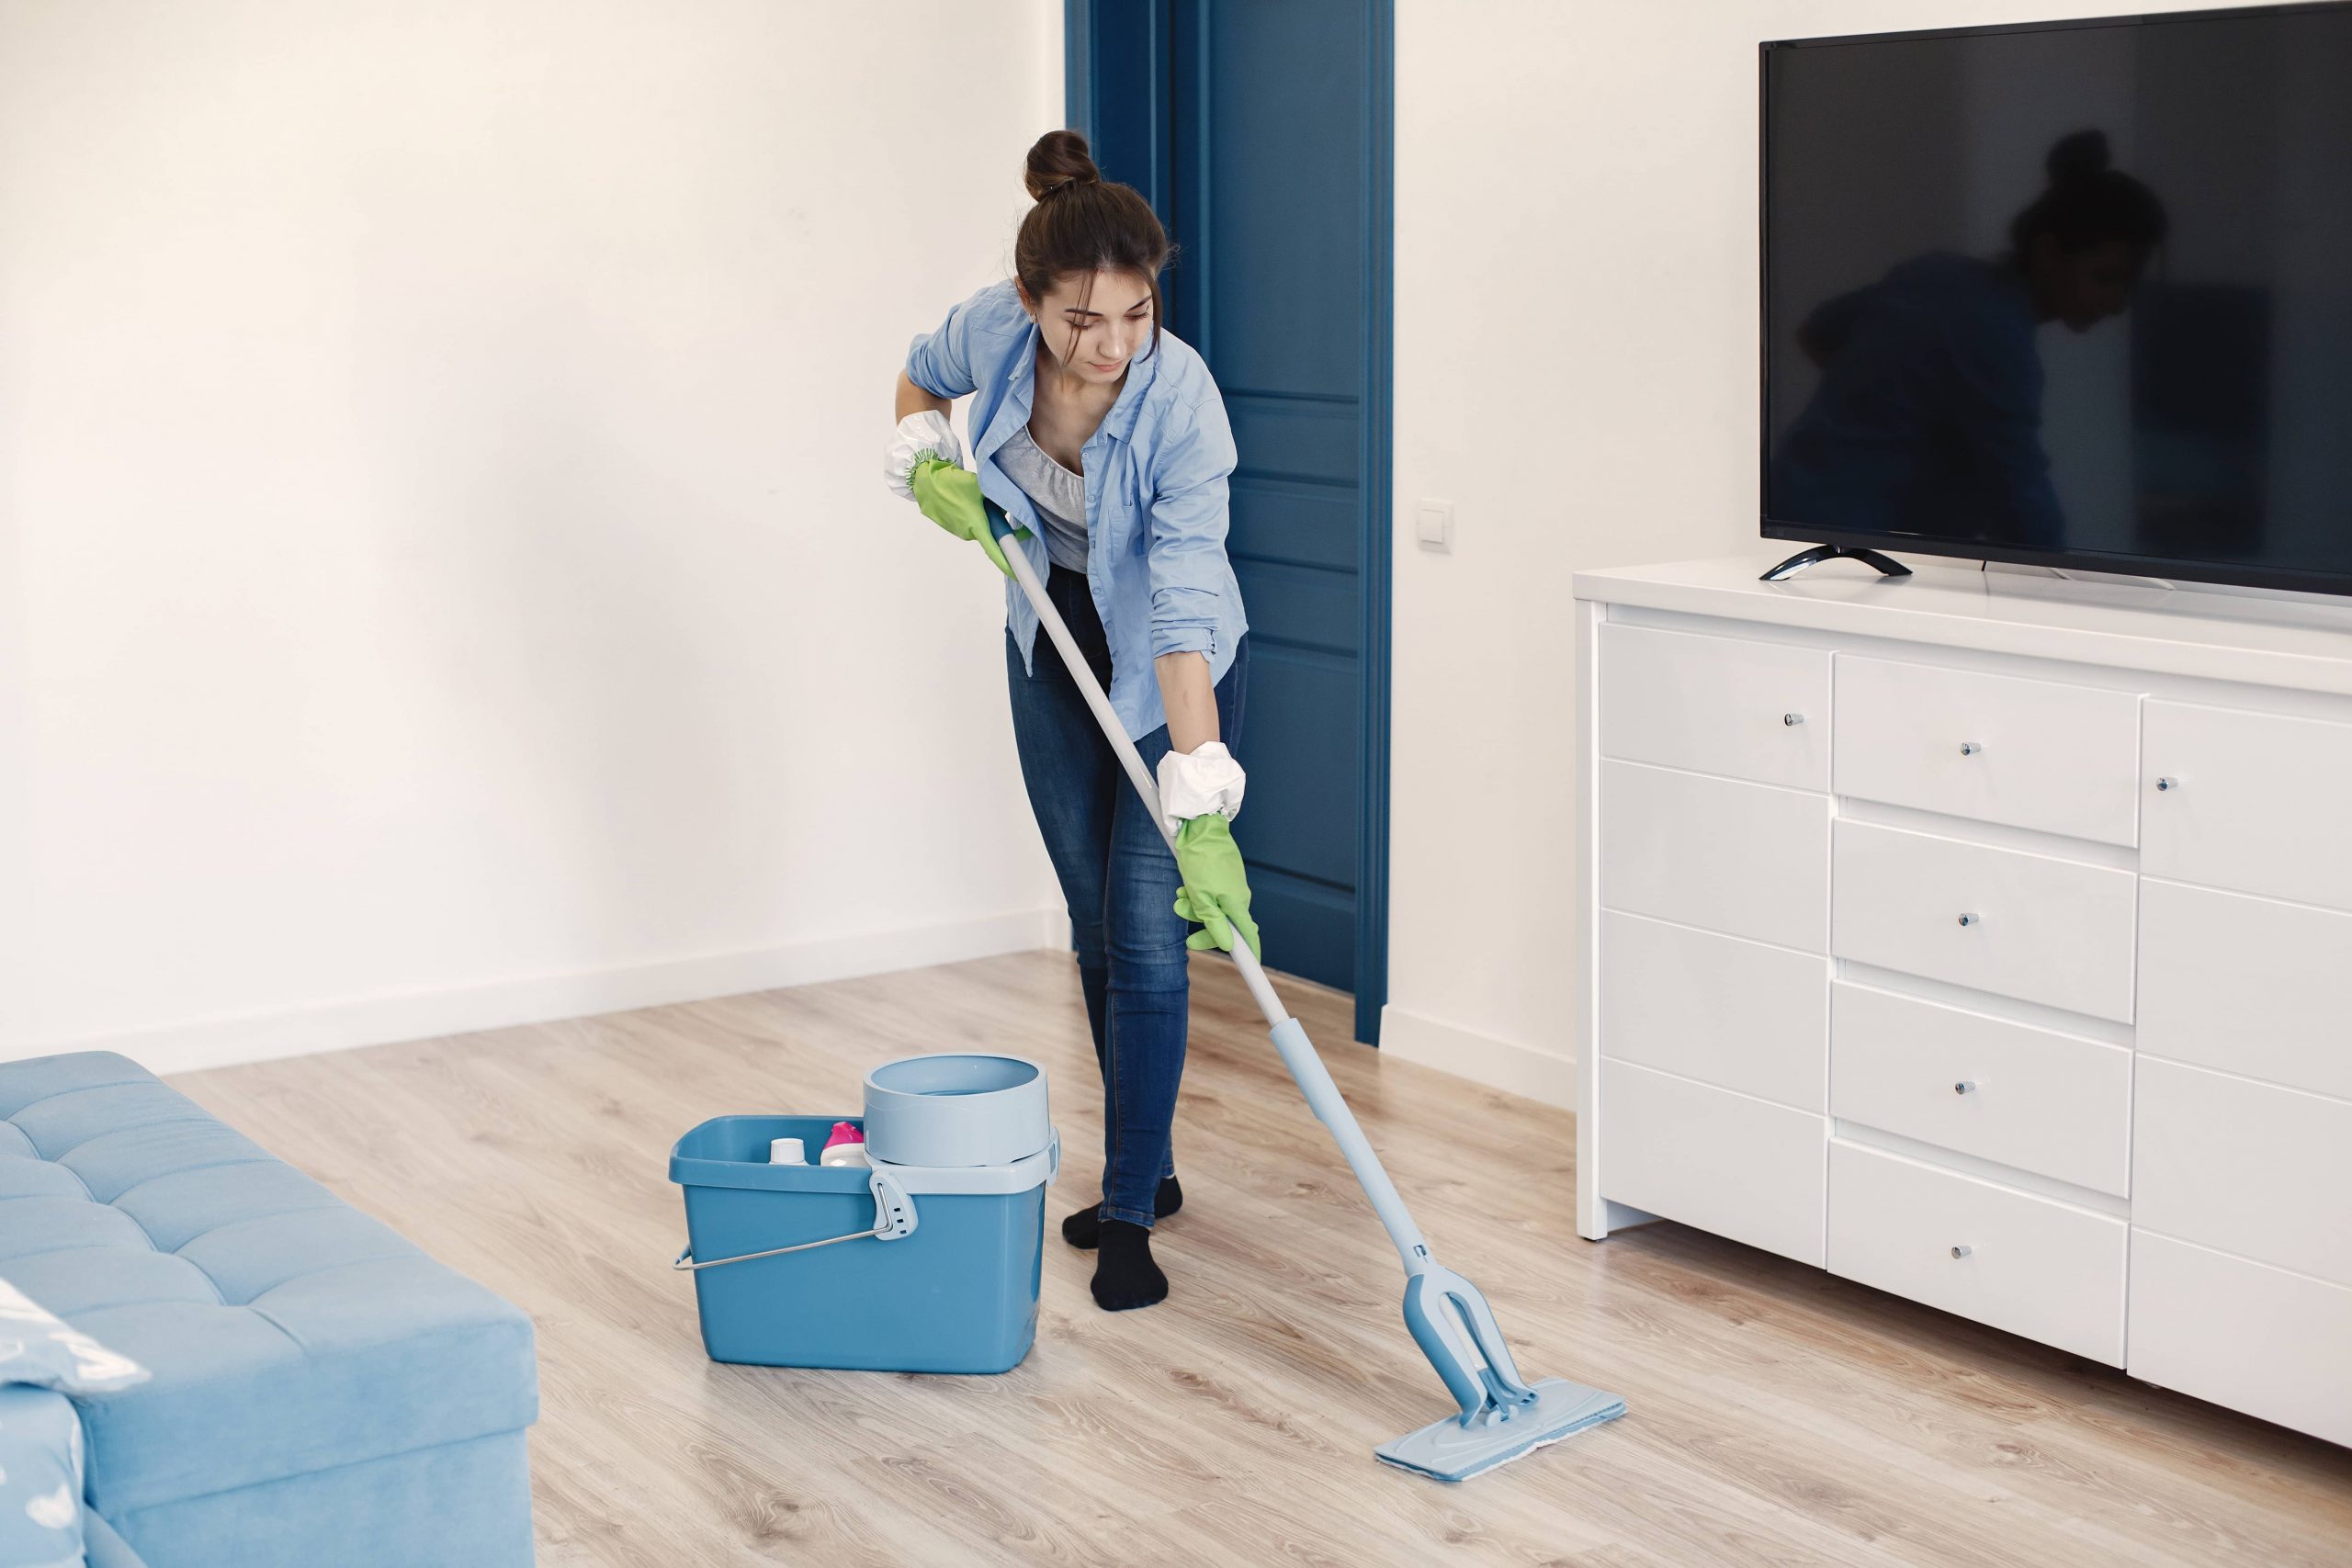 Villa/Apartment Cleaning